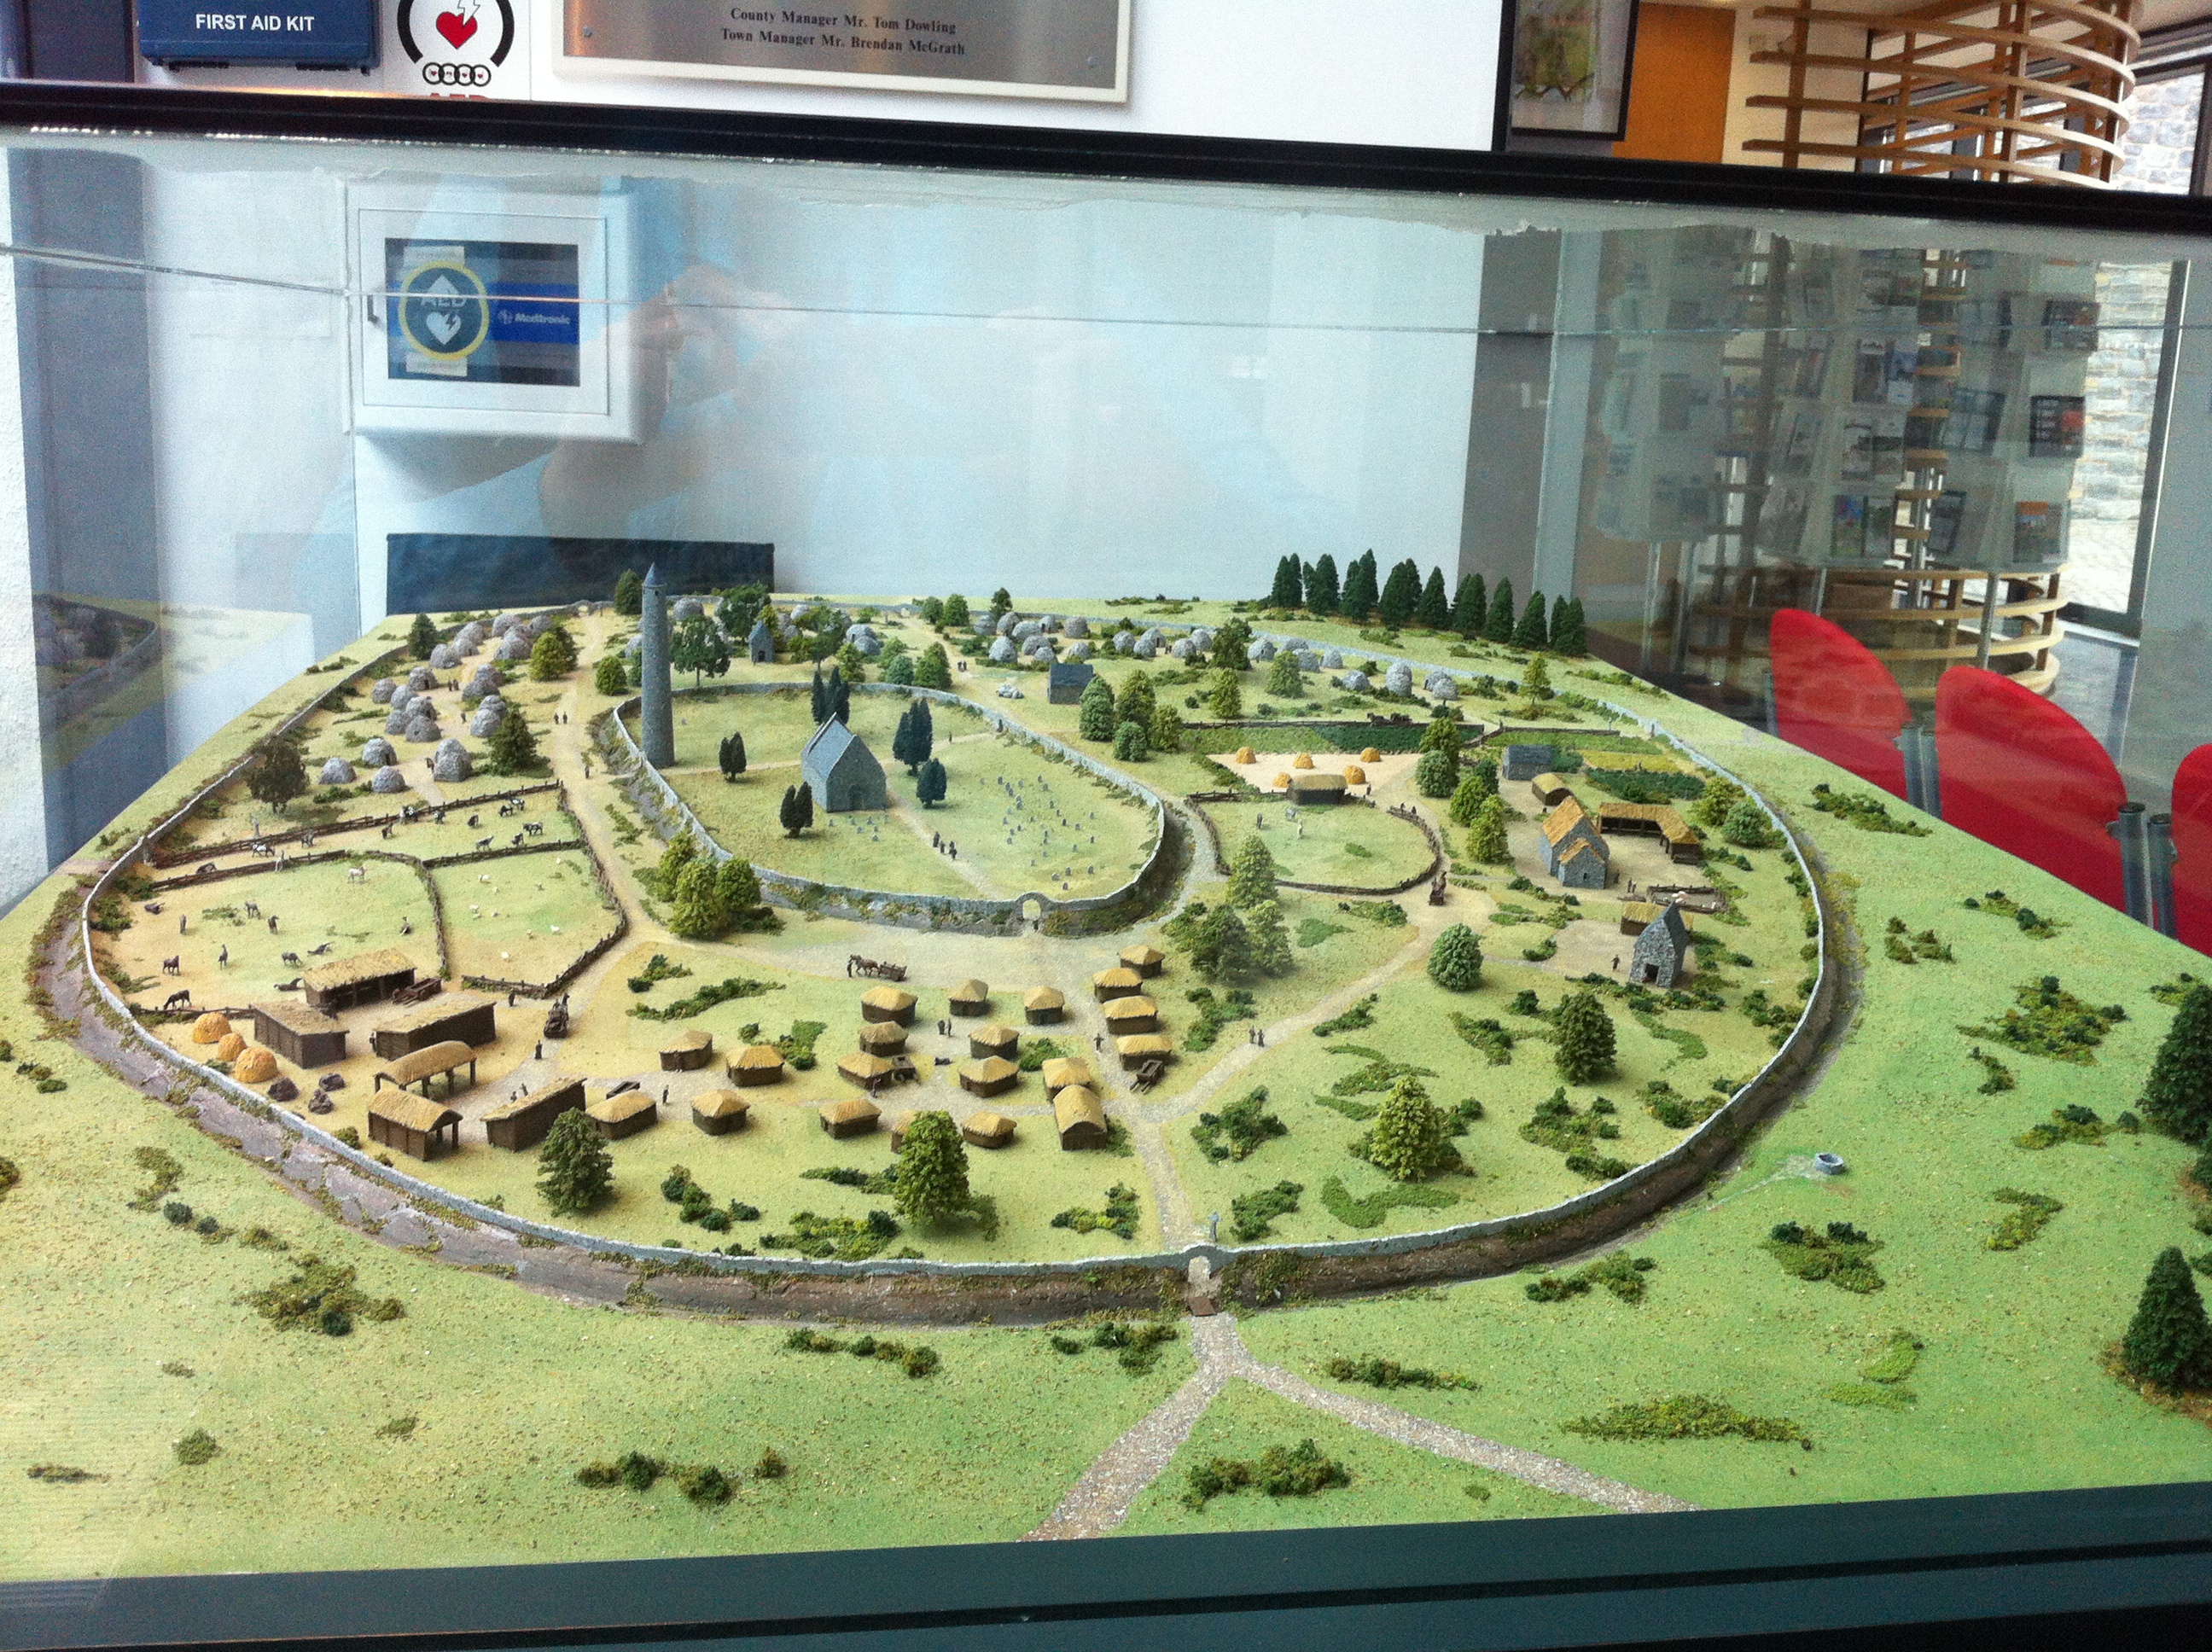 In the tourist information center in Kells, Co Meath, is a scale model of the monastery of Kells as it may have looked in the 6th century. Photo by Annis Householder.